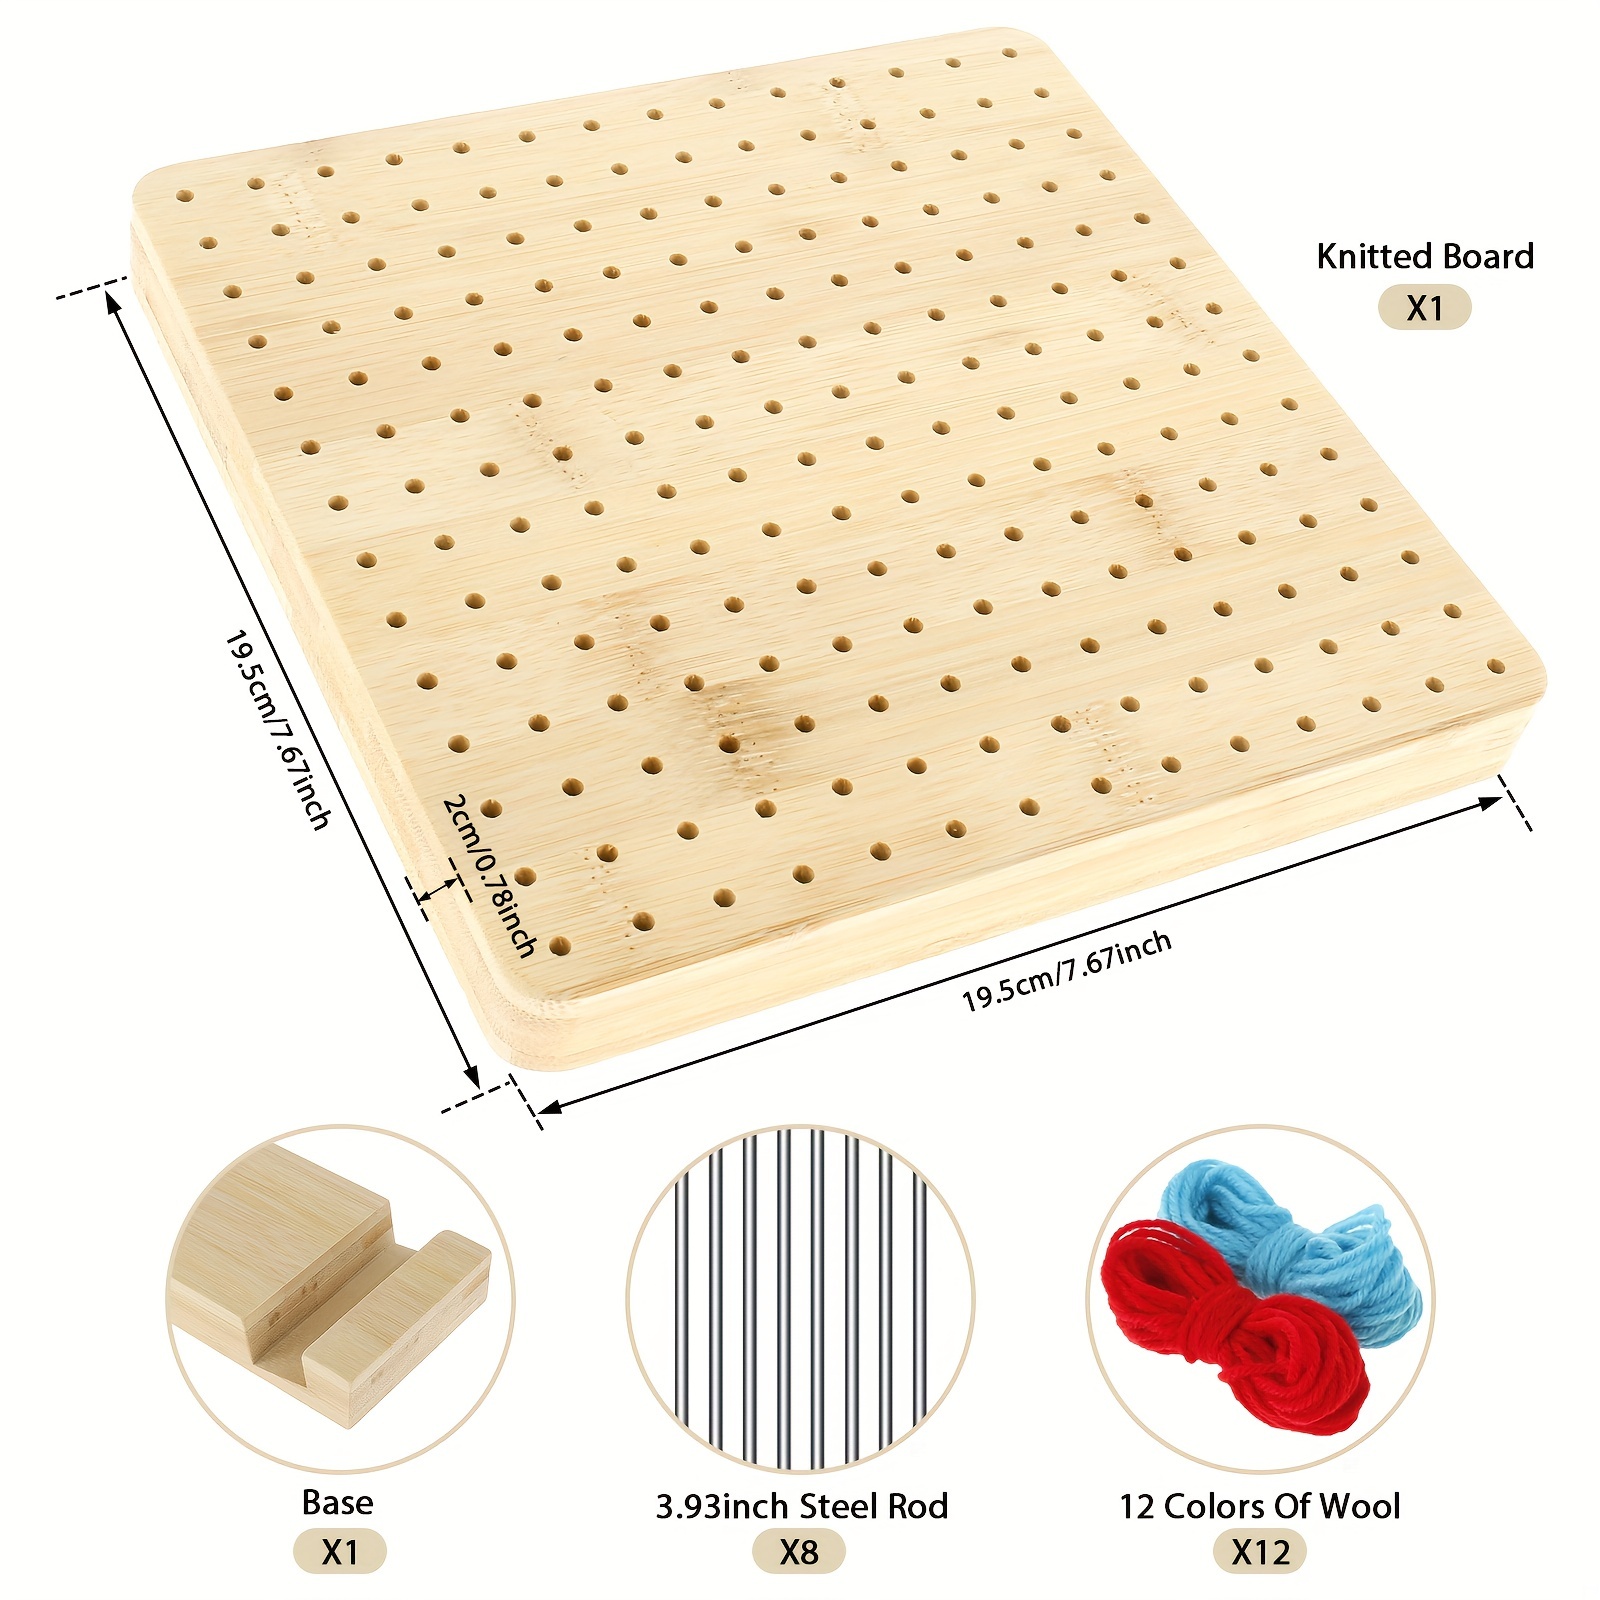 Wooden Bamboo Crochet Blocking Board Kit With Stainless Steel Rod Pins For  Woolen Knitting Sewing Crafting DIY Practical Gifts